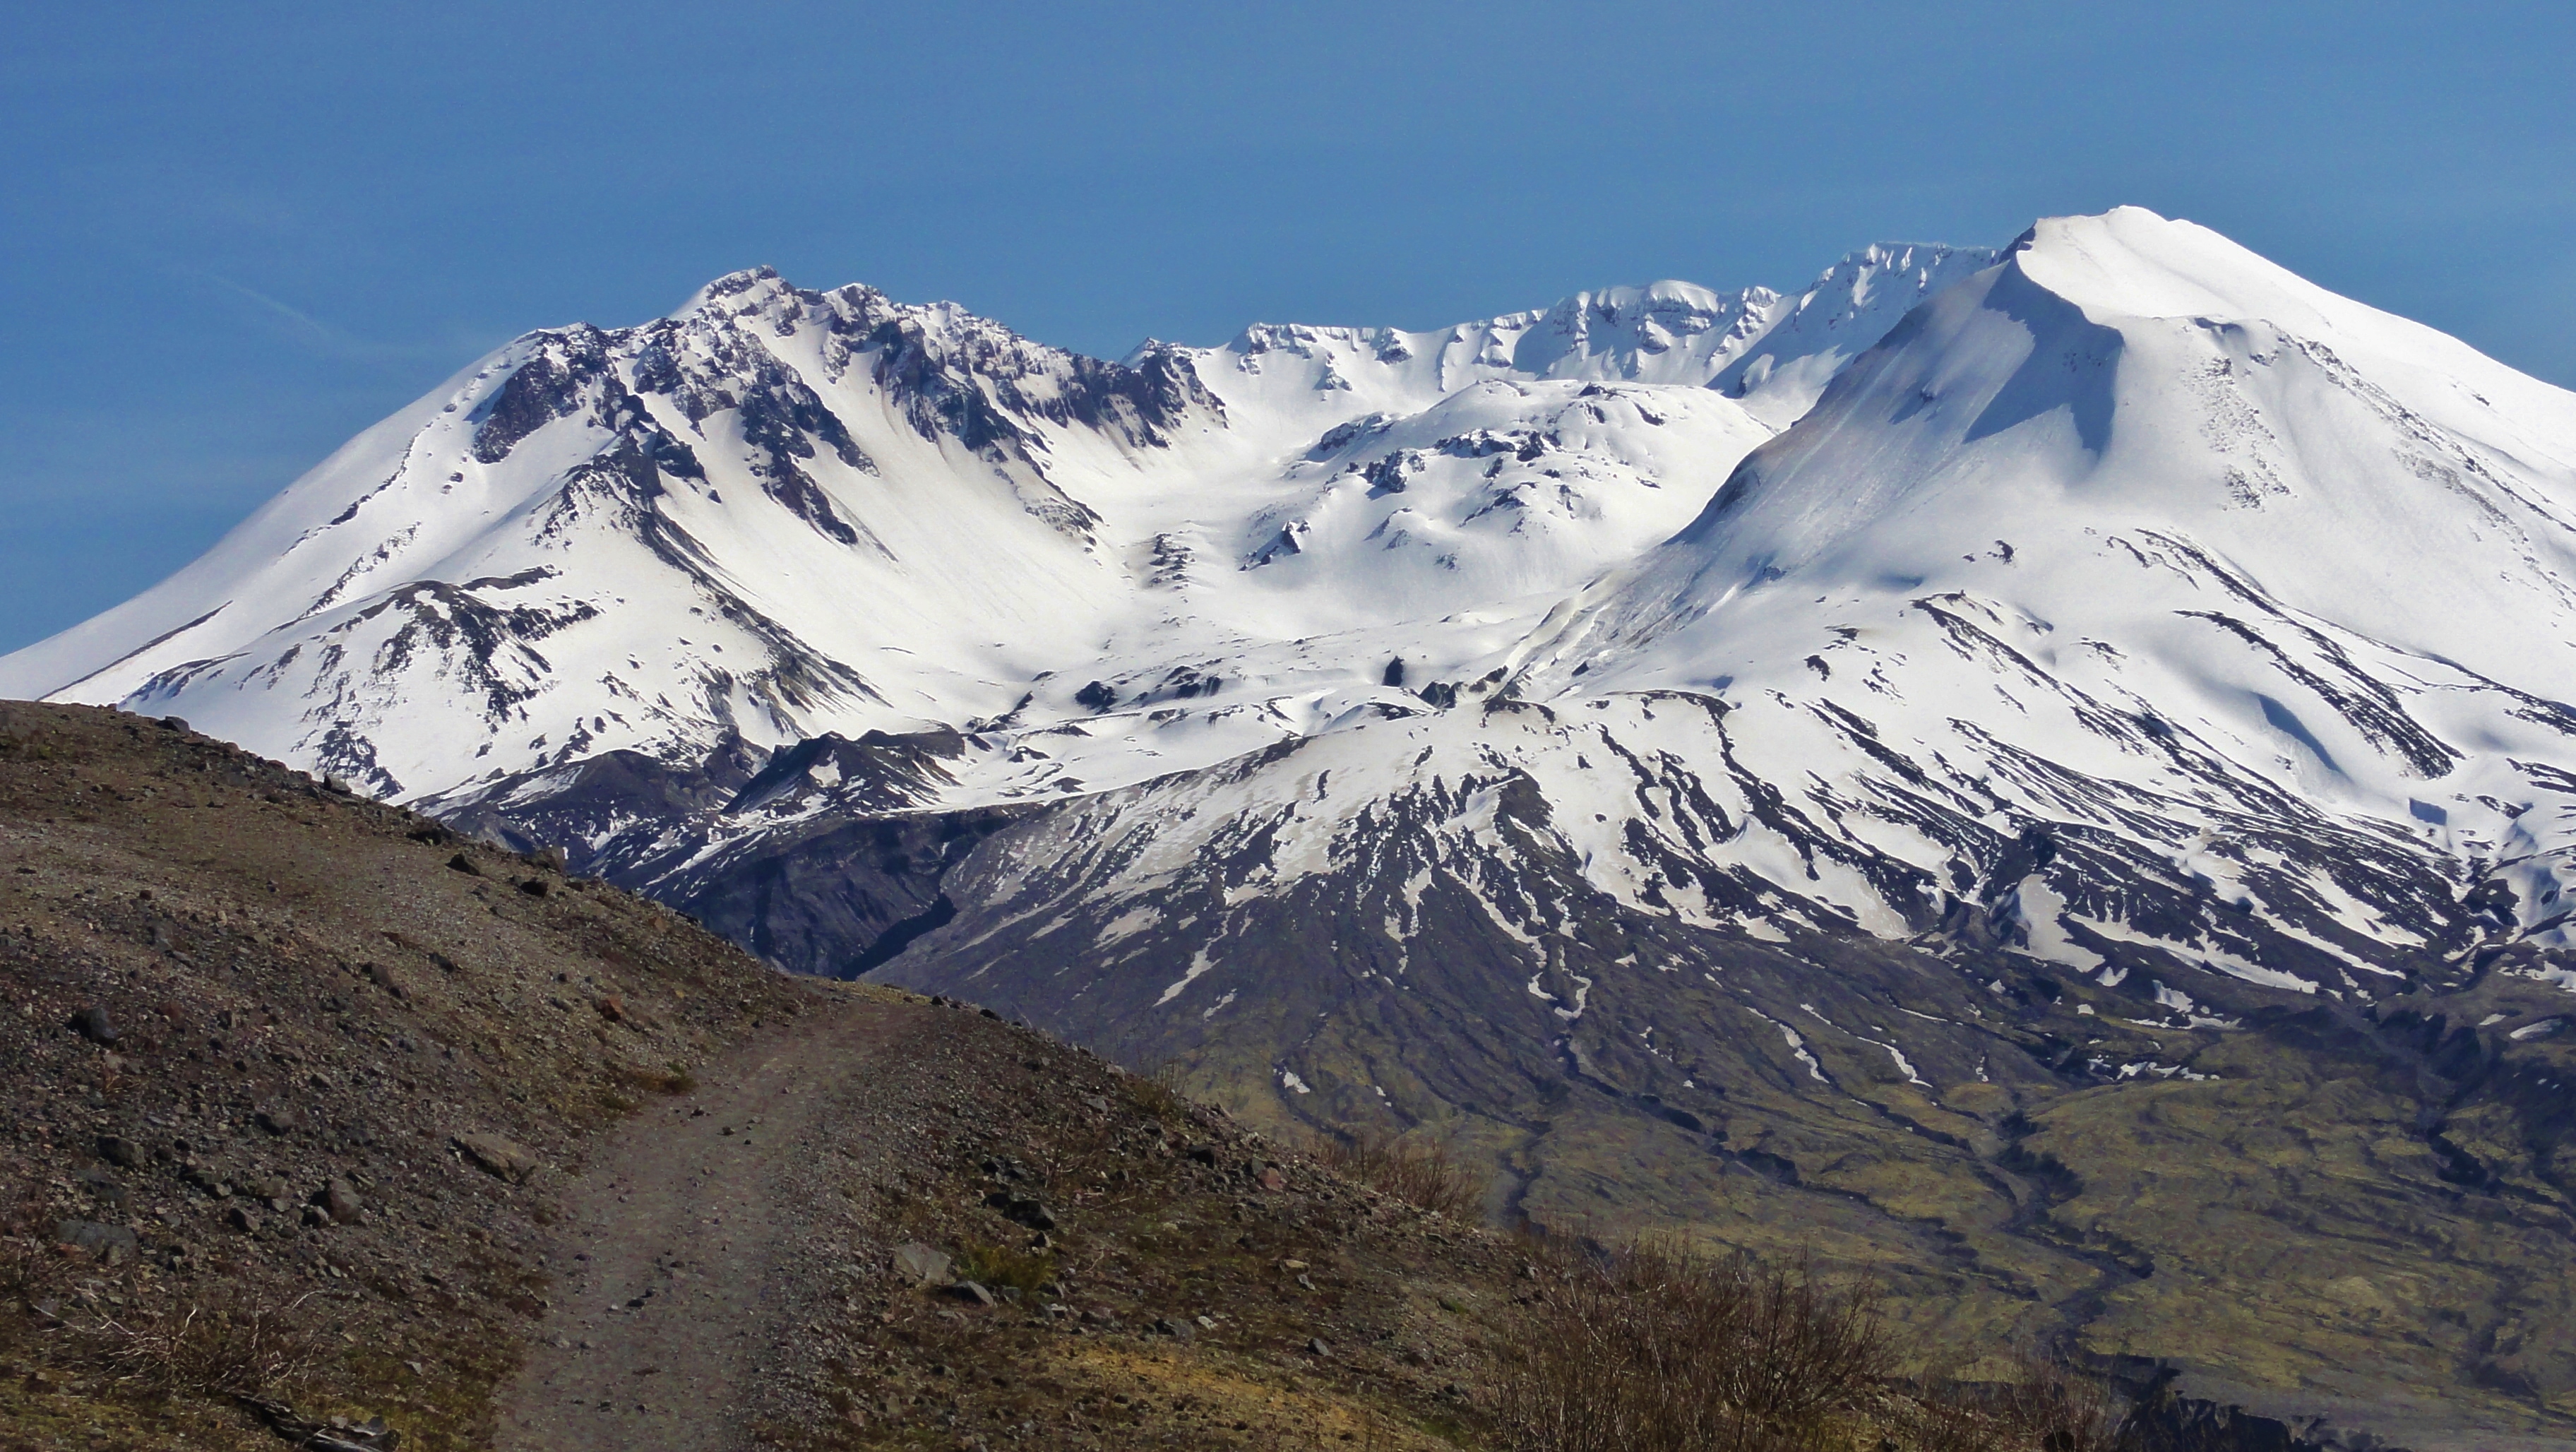 Image shows a bit of dirt trail winding along the side of a bare ridge. It seems to vanish into the snow-capped crater of Mount St. Helens in the distance. The view shows the dome rising from the center.